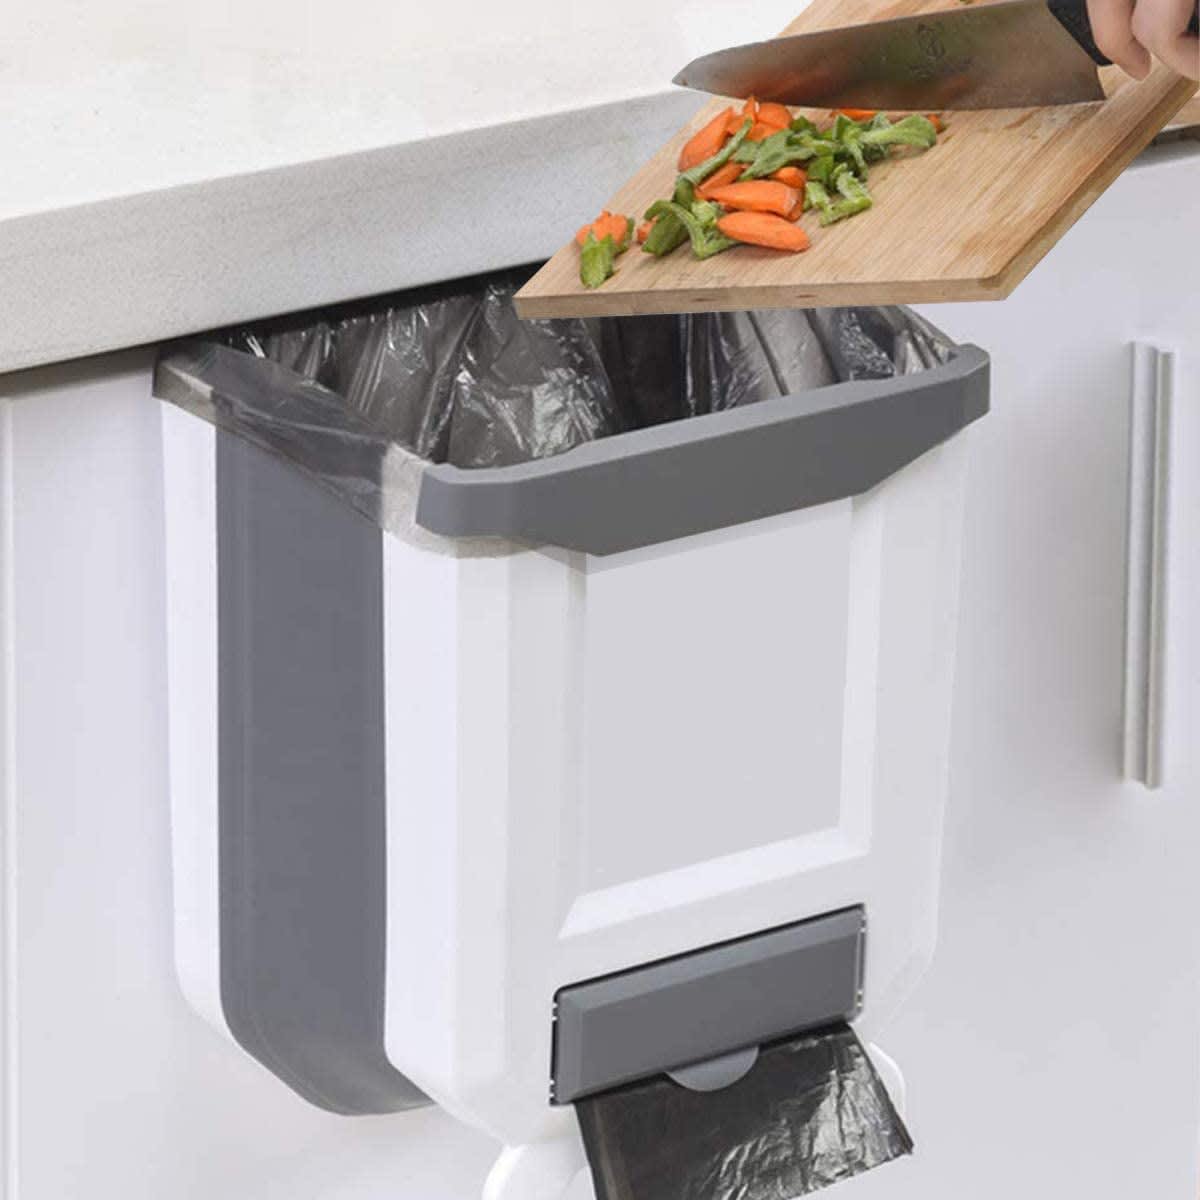 http://cdn.apartmenttherapy.info/image/upload/v1674683051/k/Amazon_Collapsible_Kitchen_Trash_Can.jpg